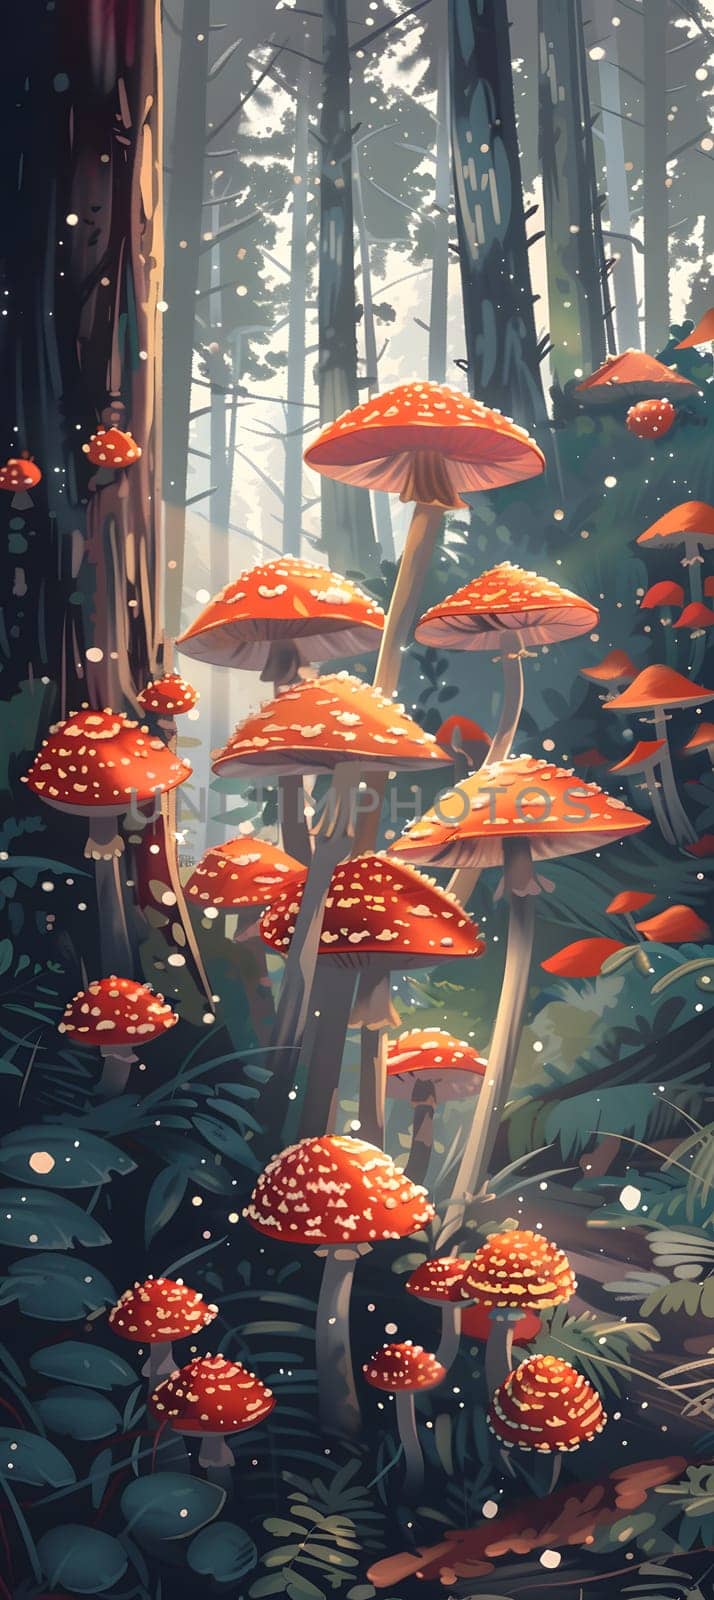 A cluster of mushrooms thrives in the heart of a lush forest, adding tints and shades to the natural landscape. These terrestrial plants are like fashion accessories in this annual plant event